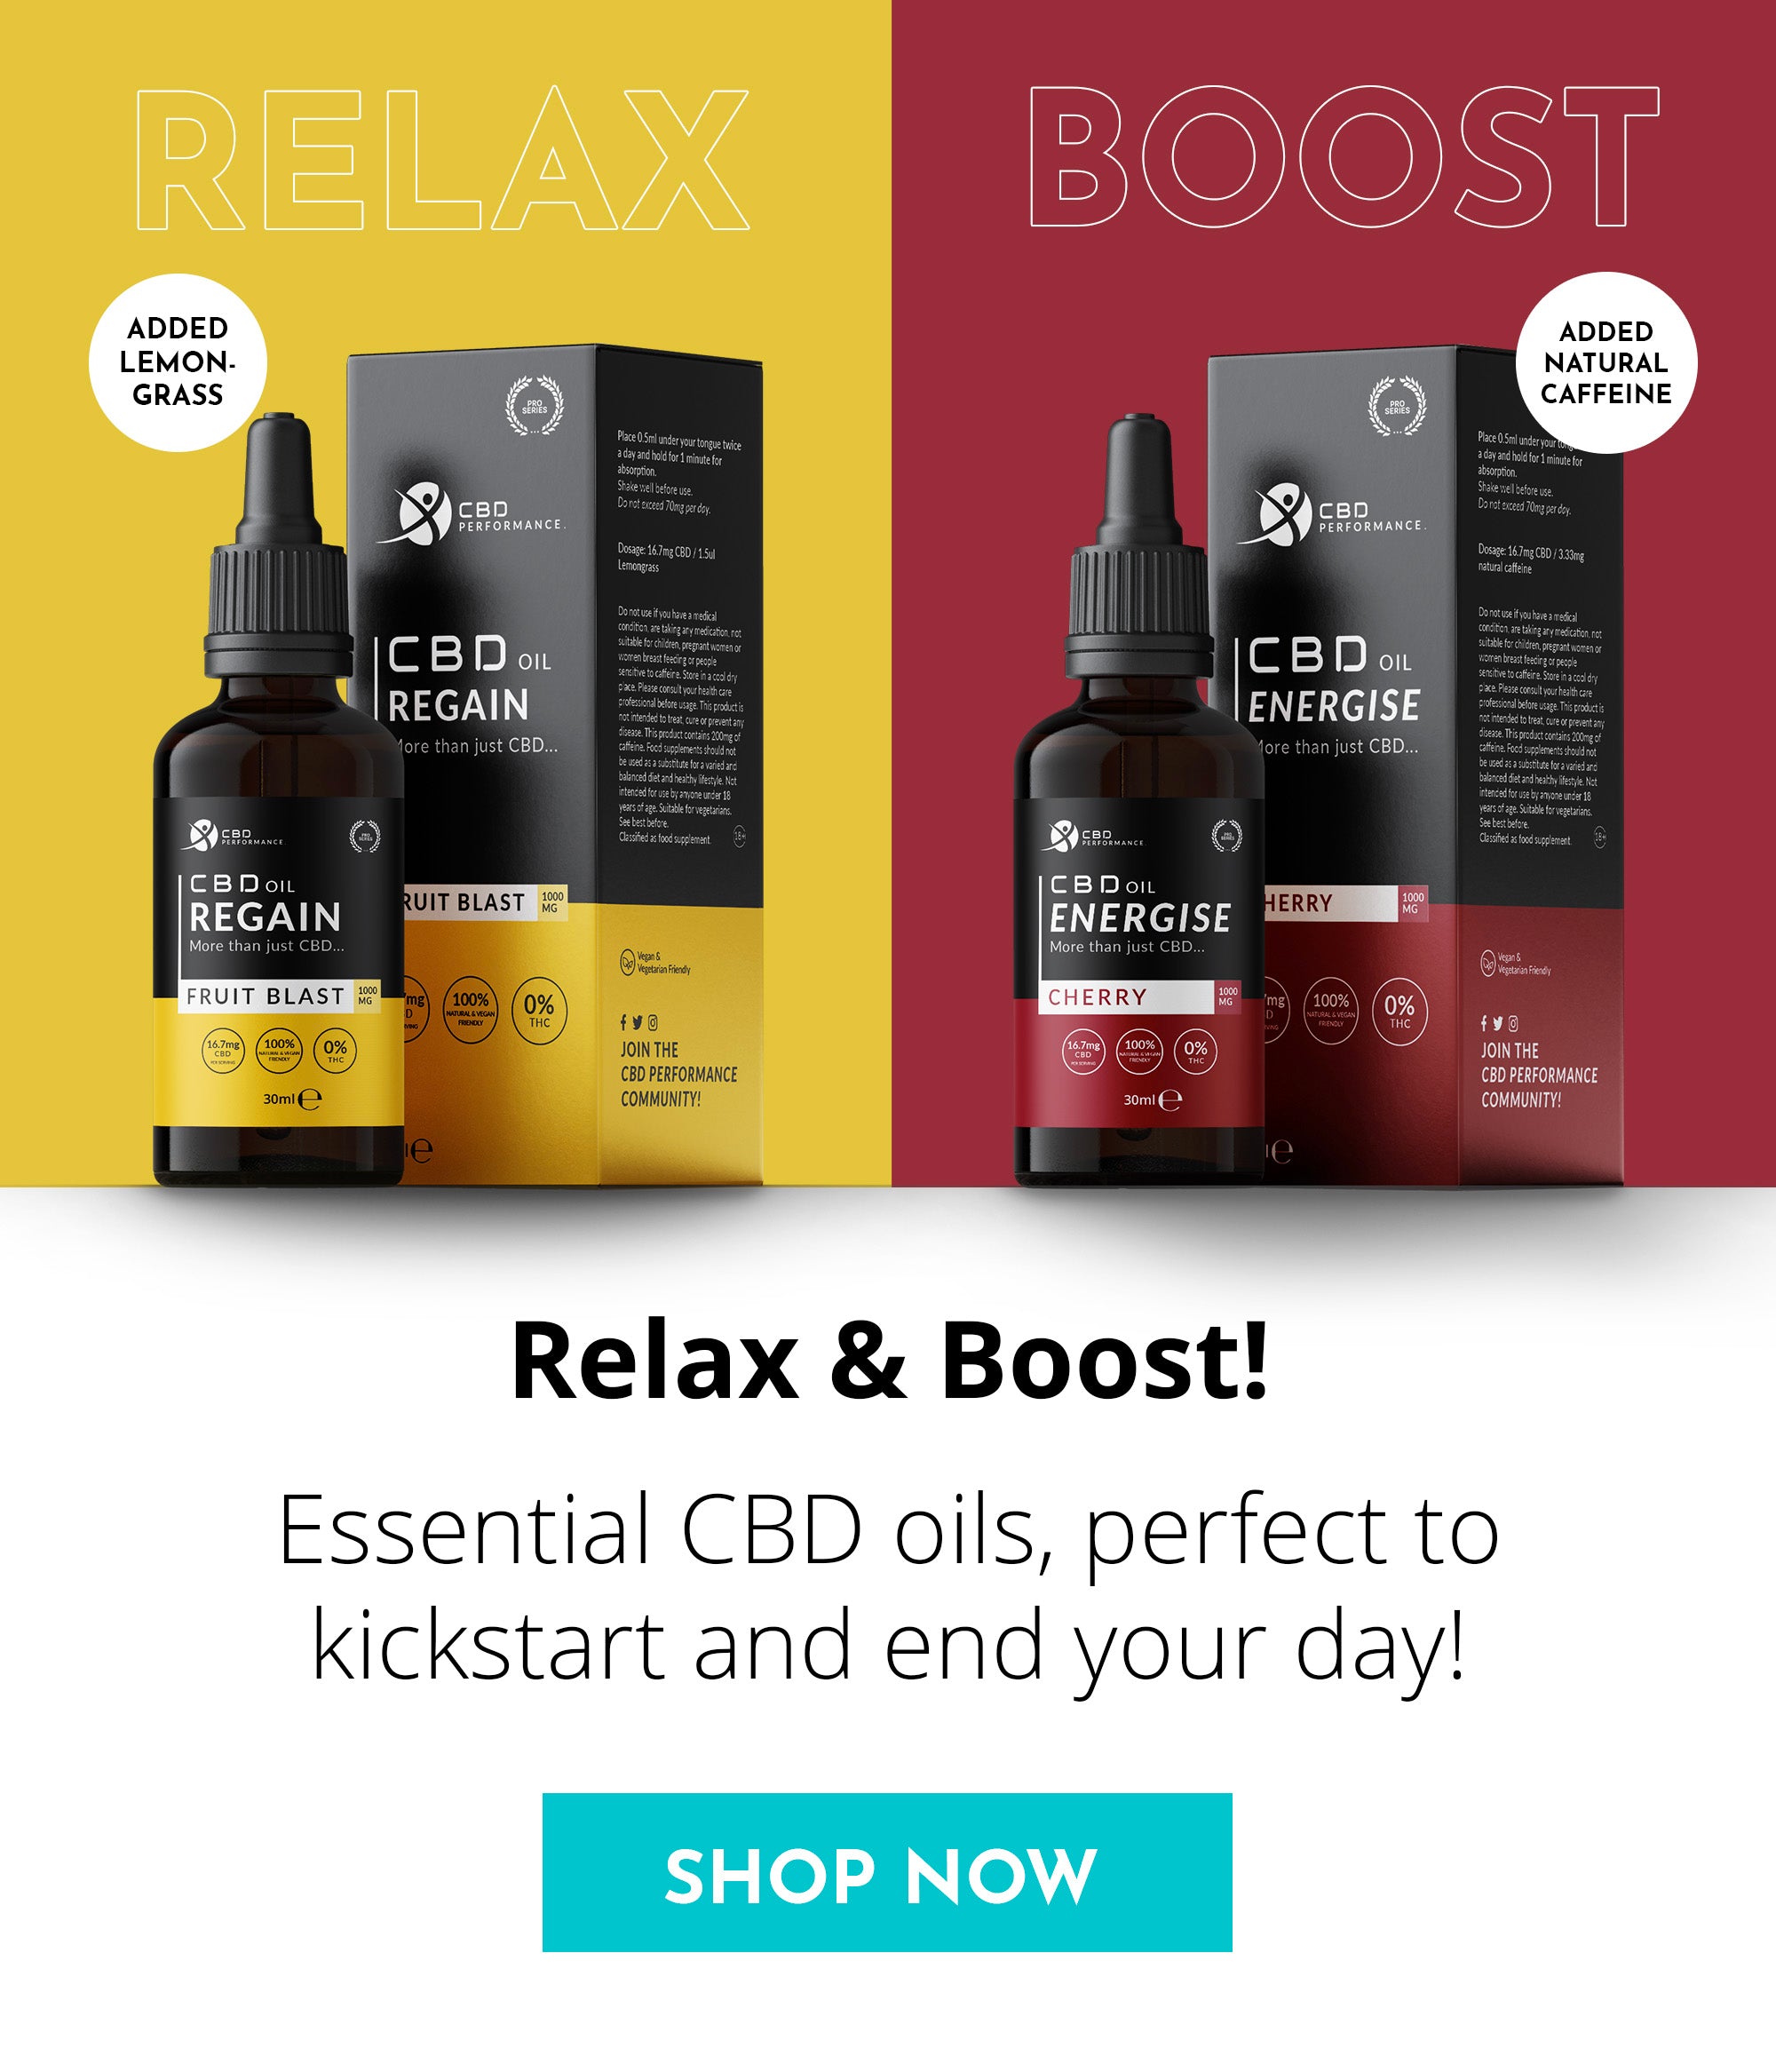 CBD oils for boosting and relaxing